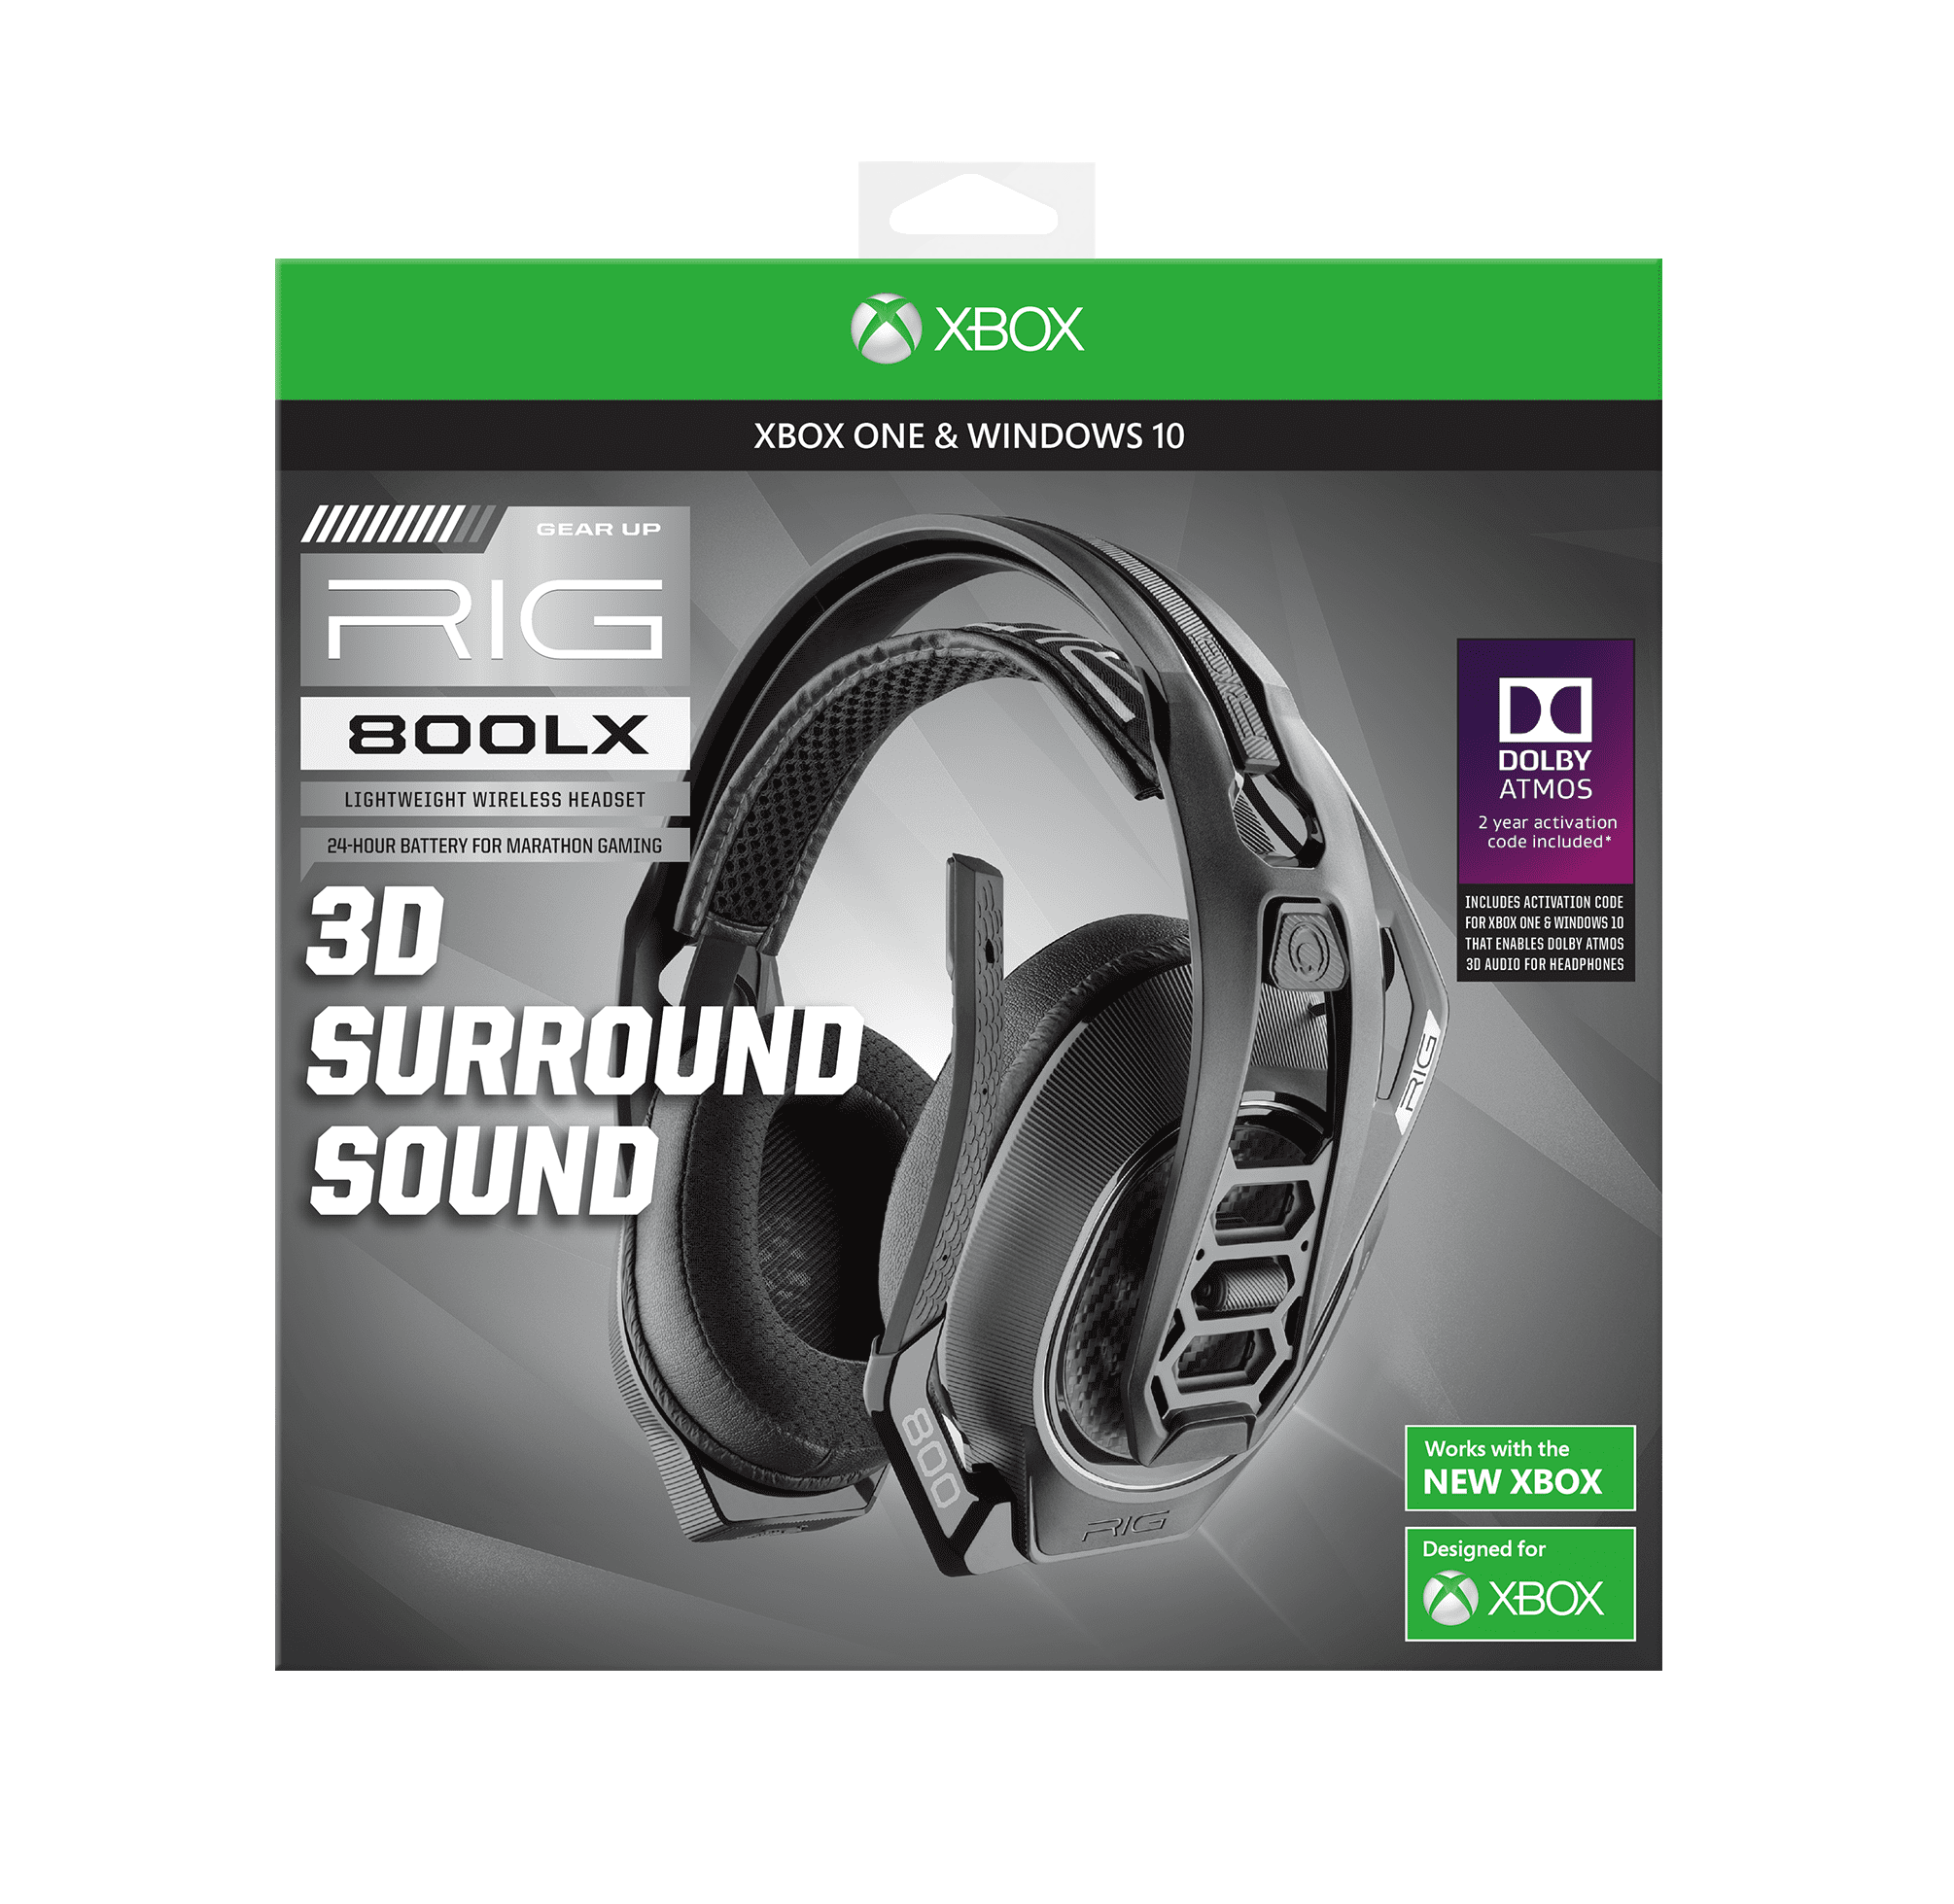 RIG LX Dolby Gaming Headset For XBOX - Walmart.com